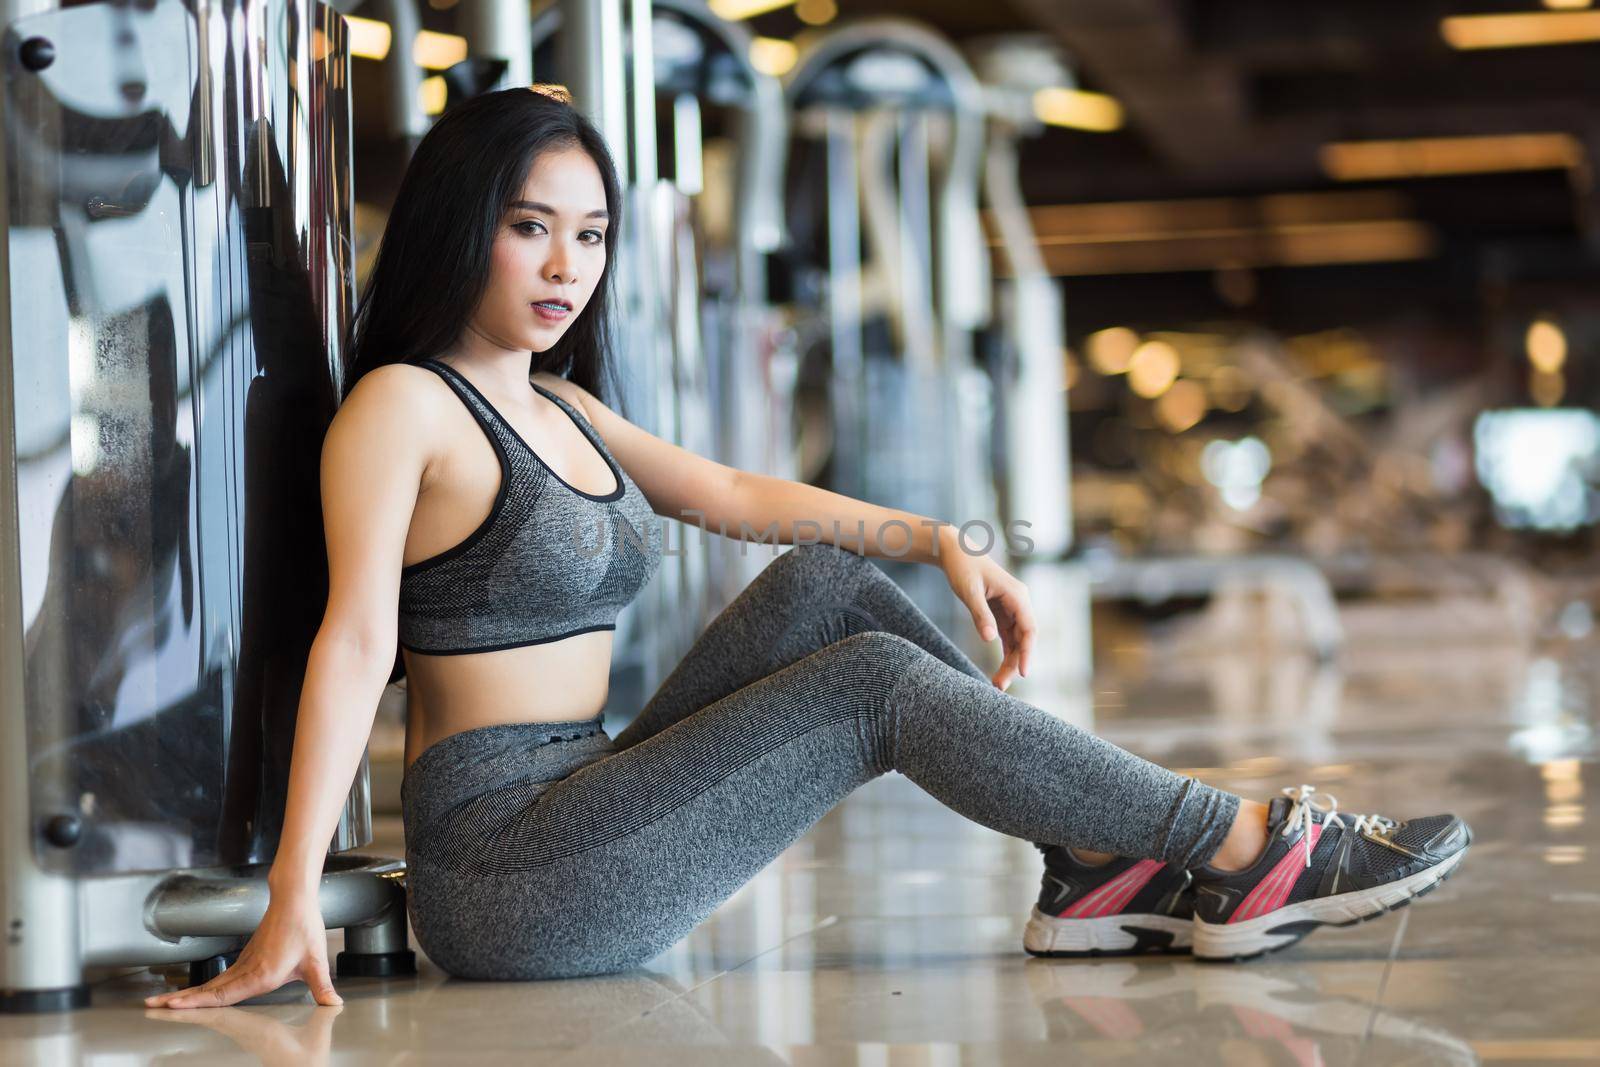 Fitness Asian women sitting in sport gym interior and fitness health club with sports exercise equipment Gym background. by tinapob2534